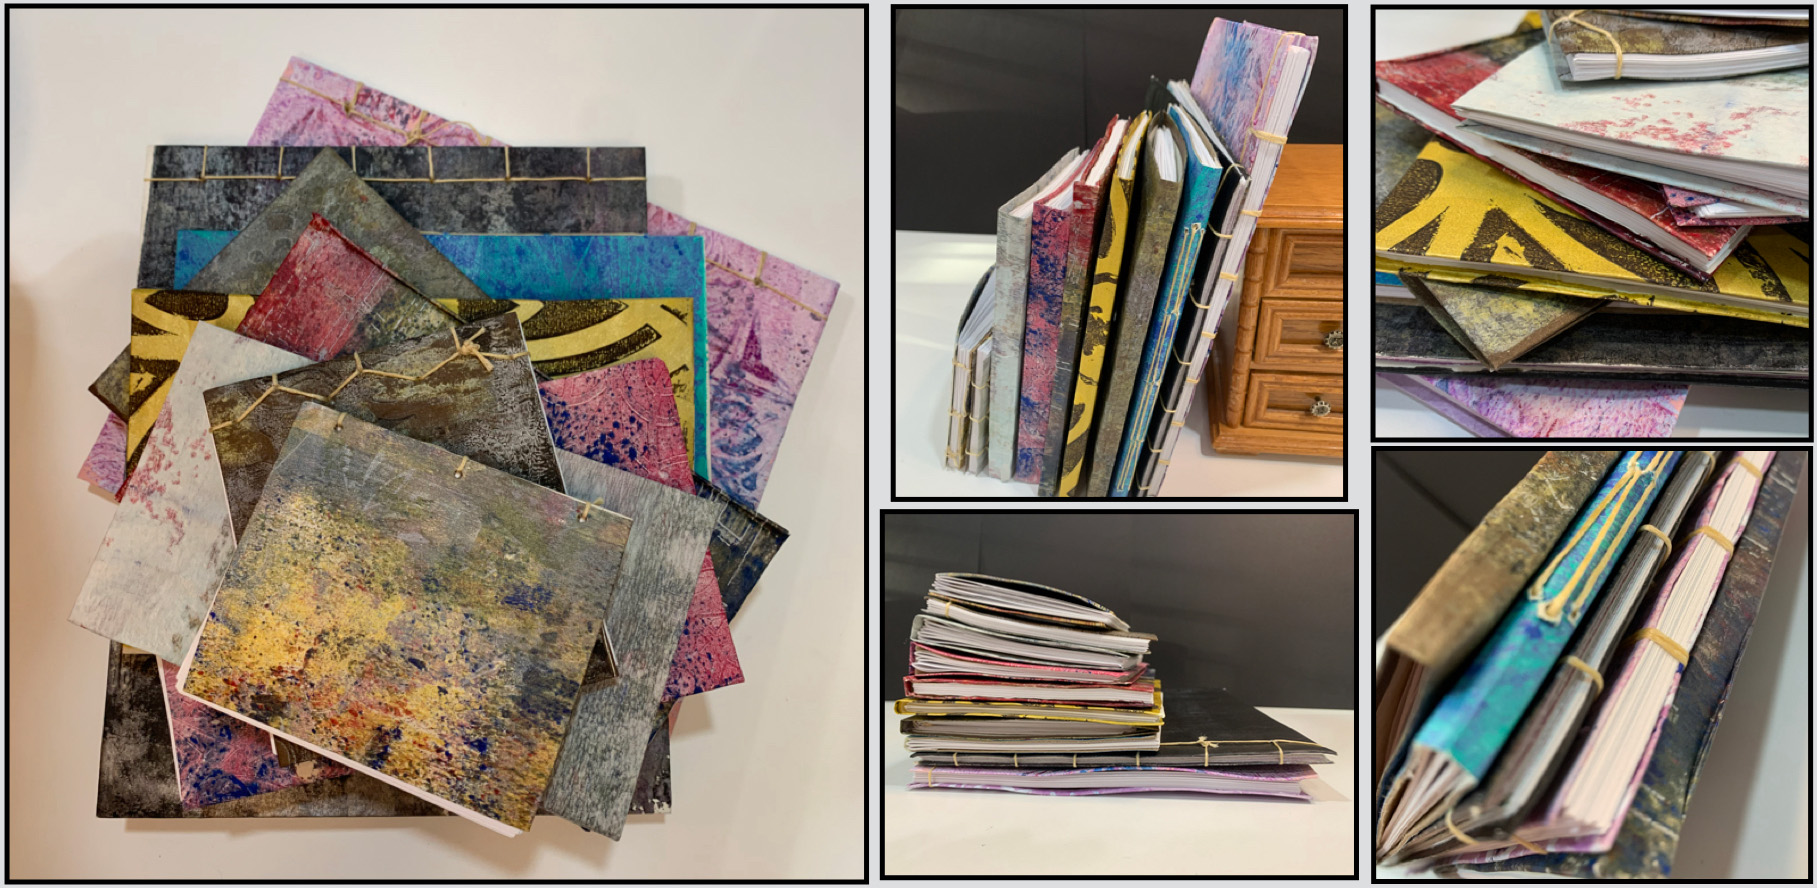 Journals / Journals created for the purpose of daily art creation and reflection.  Gelli plate print, hand stitched bookmaking